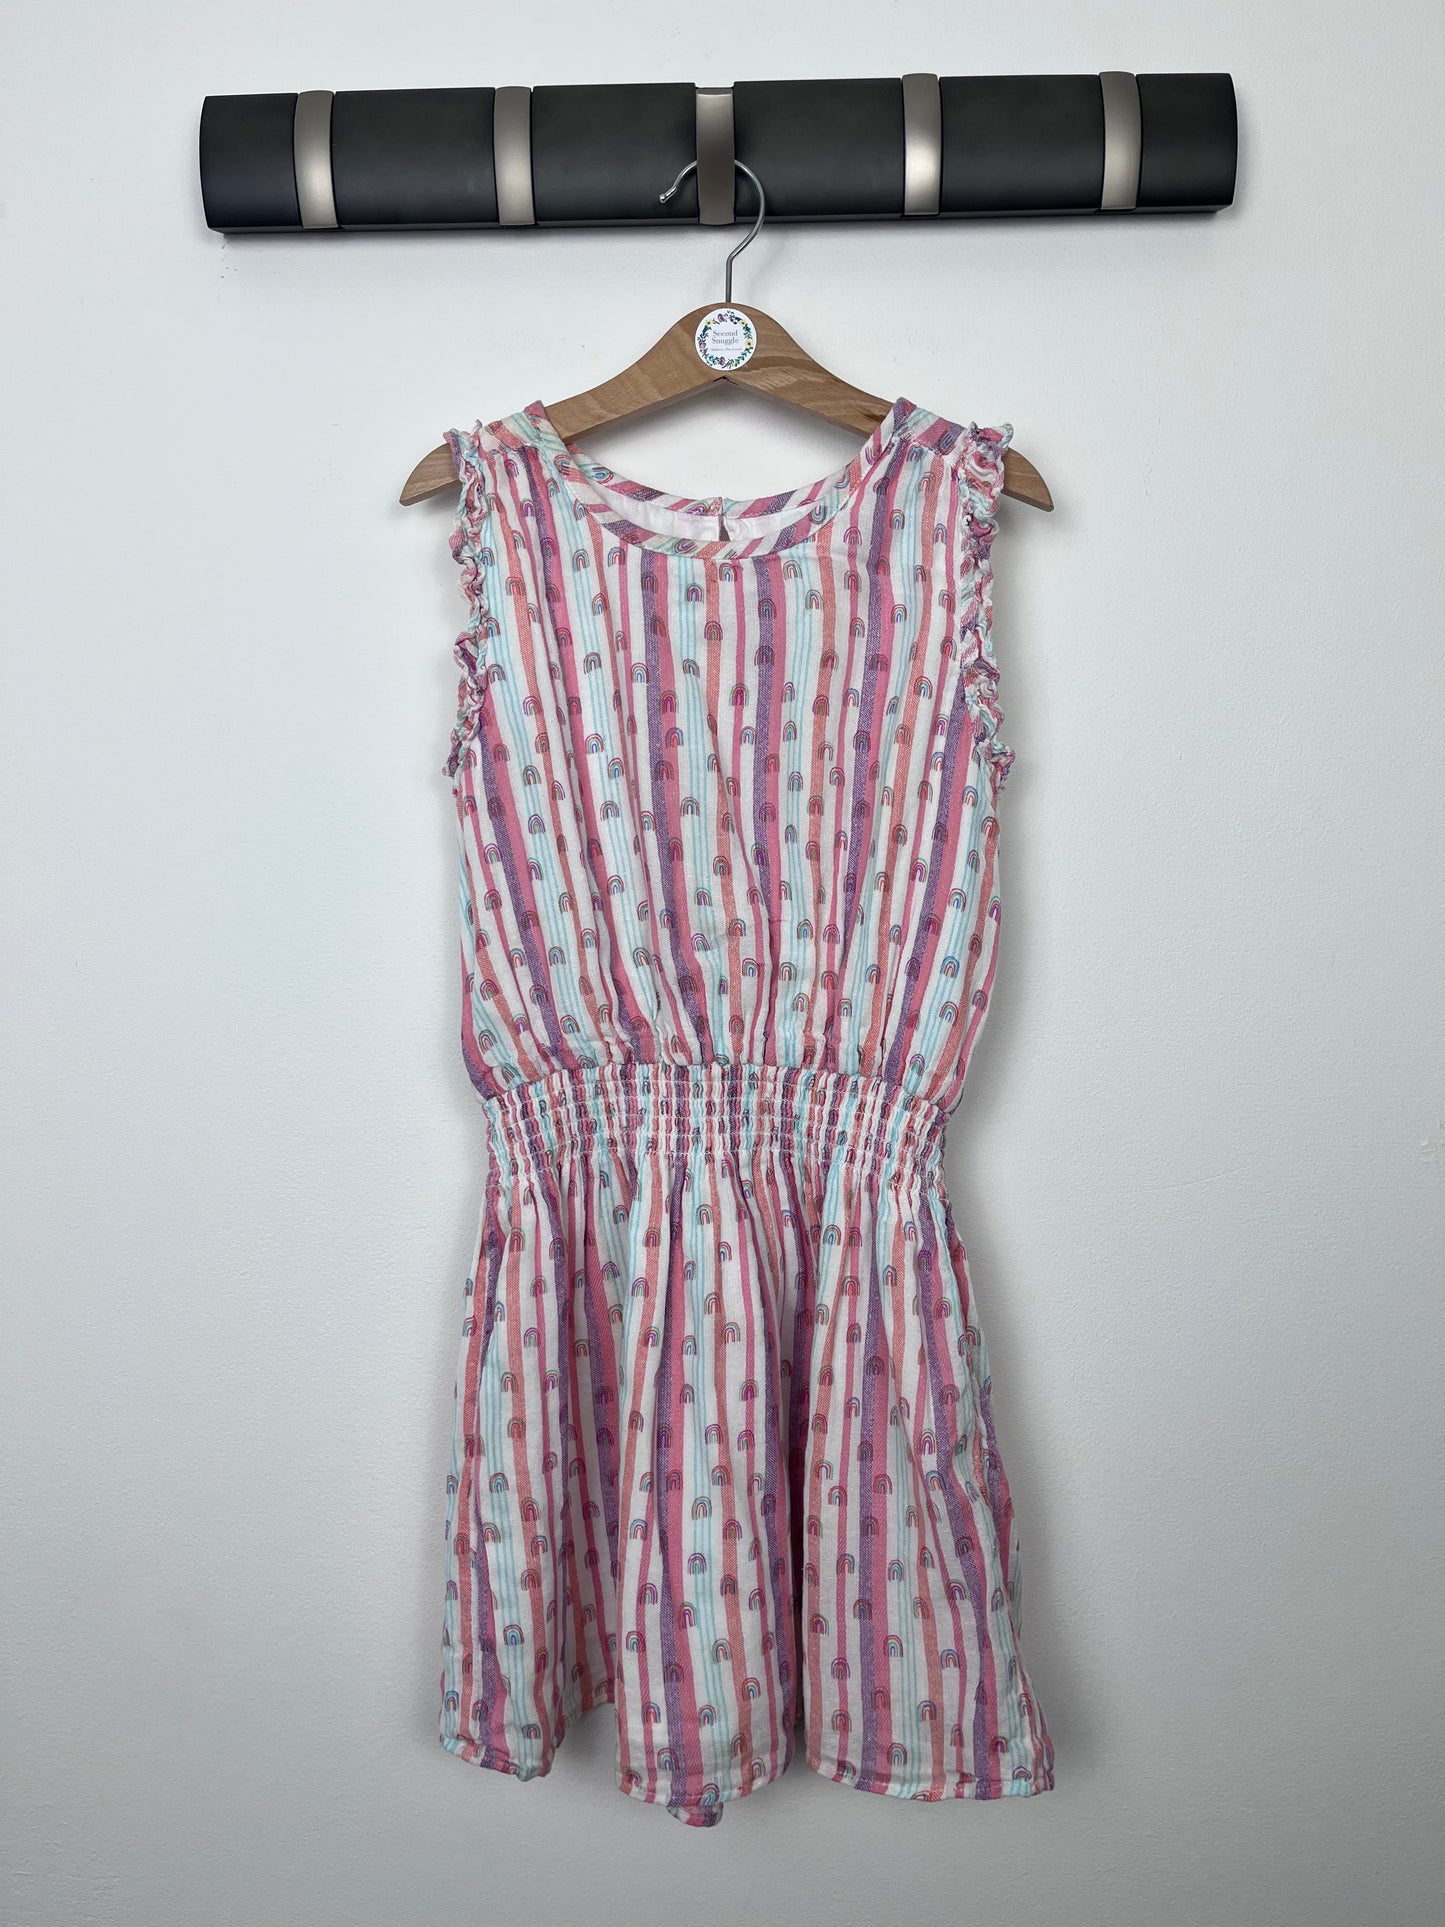 Hatley 7 Years-Dresses-Second Snuggle Preloved